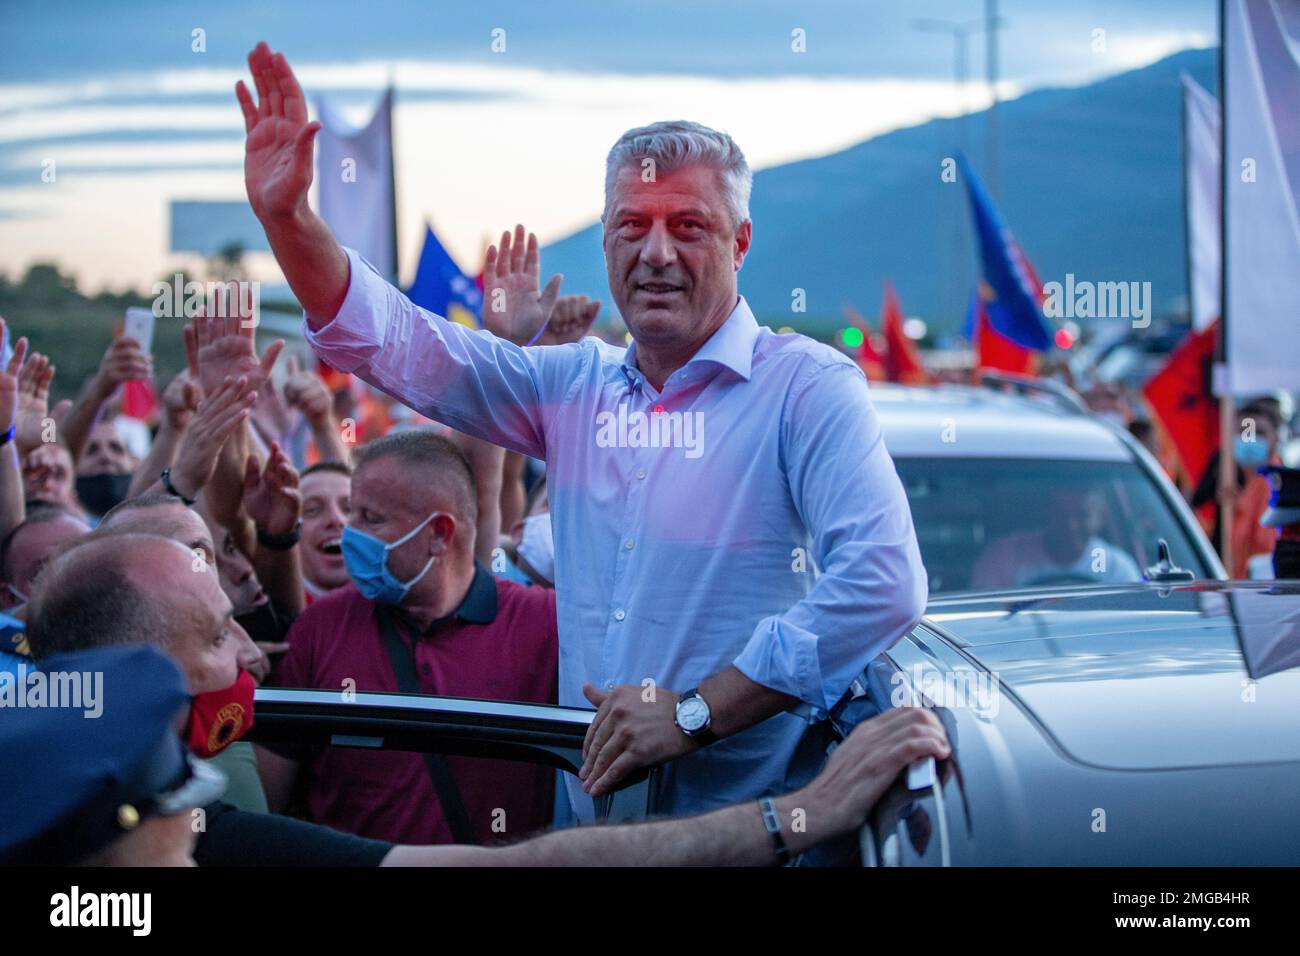 Kosovo President Hashim Thaci greets former members of the so-called Kosovo Liberation army, which fought for independence from Serbia, and other supporters waiting for his return at the border crossing points in Vrmice, Kosovo, Friday, July 17, 2020. Thaci was warmly welcomed by supporters upon return from the Netherlands where he was questioned by prosecutors at a special international court on alleged crimes during the 1998-1999 war after which his country won independence from Serbia. (AP Photo/Visar Kryeziu) Foto Stock